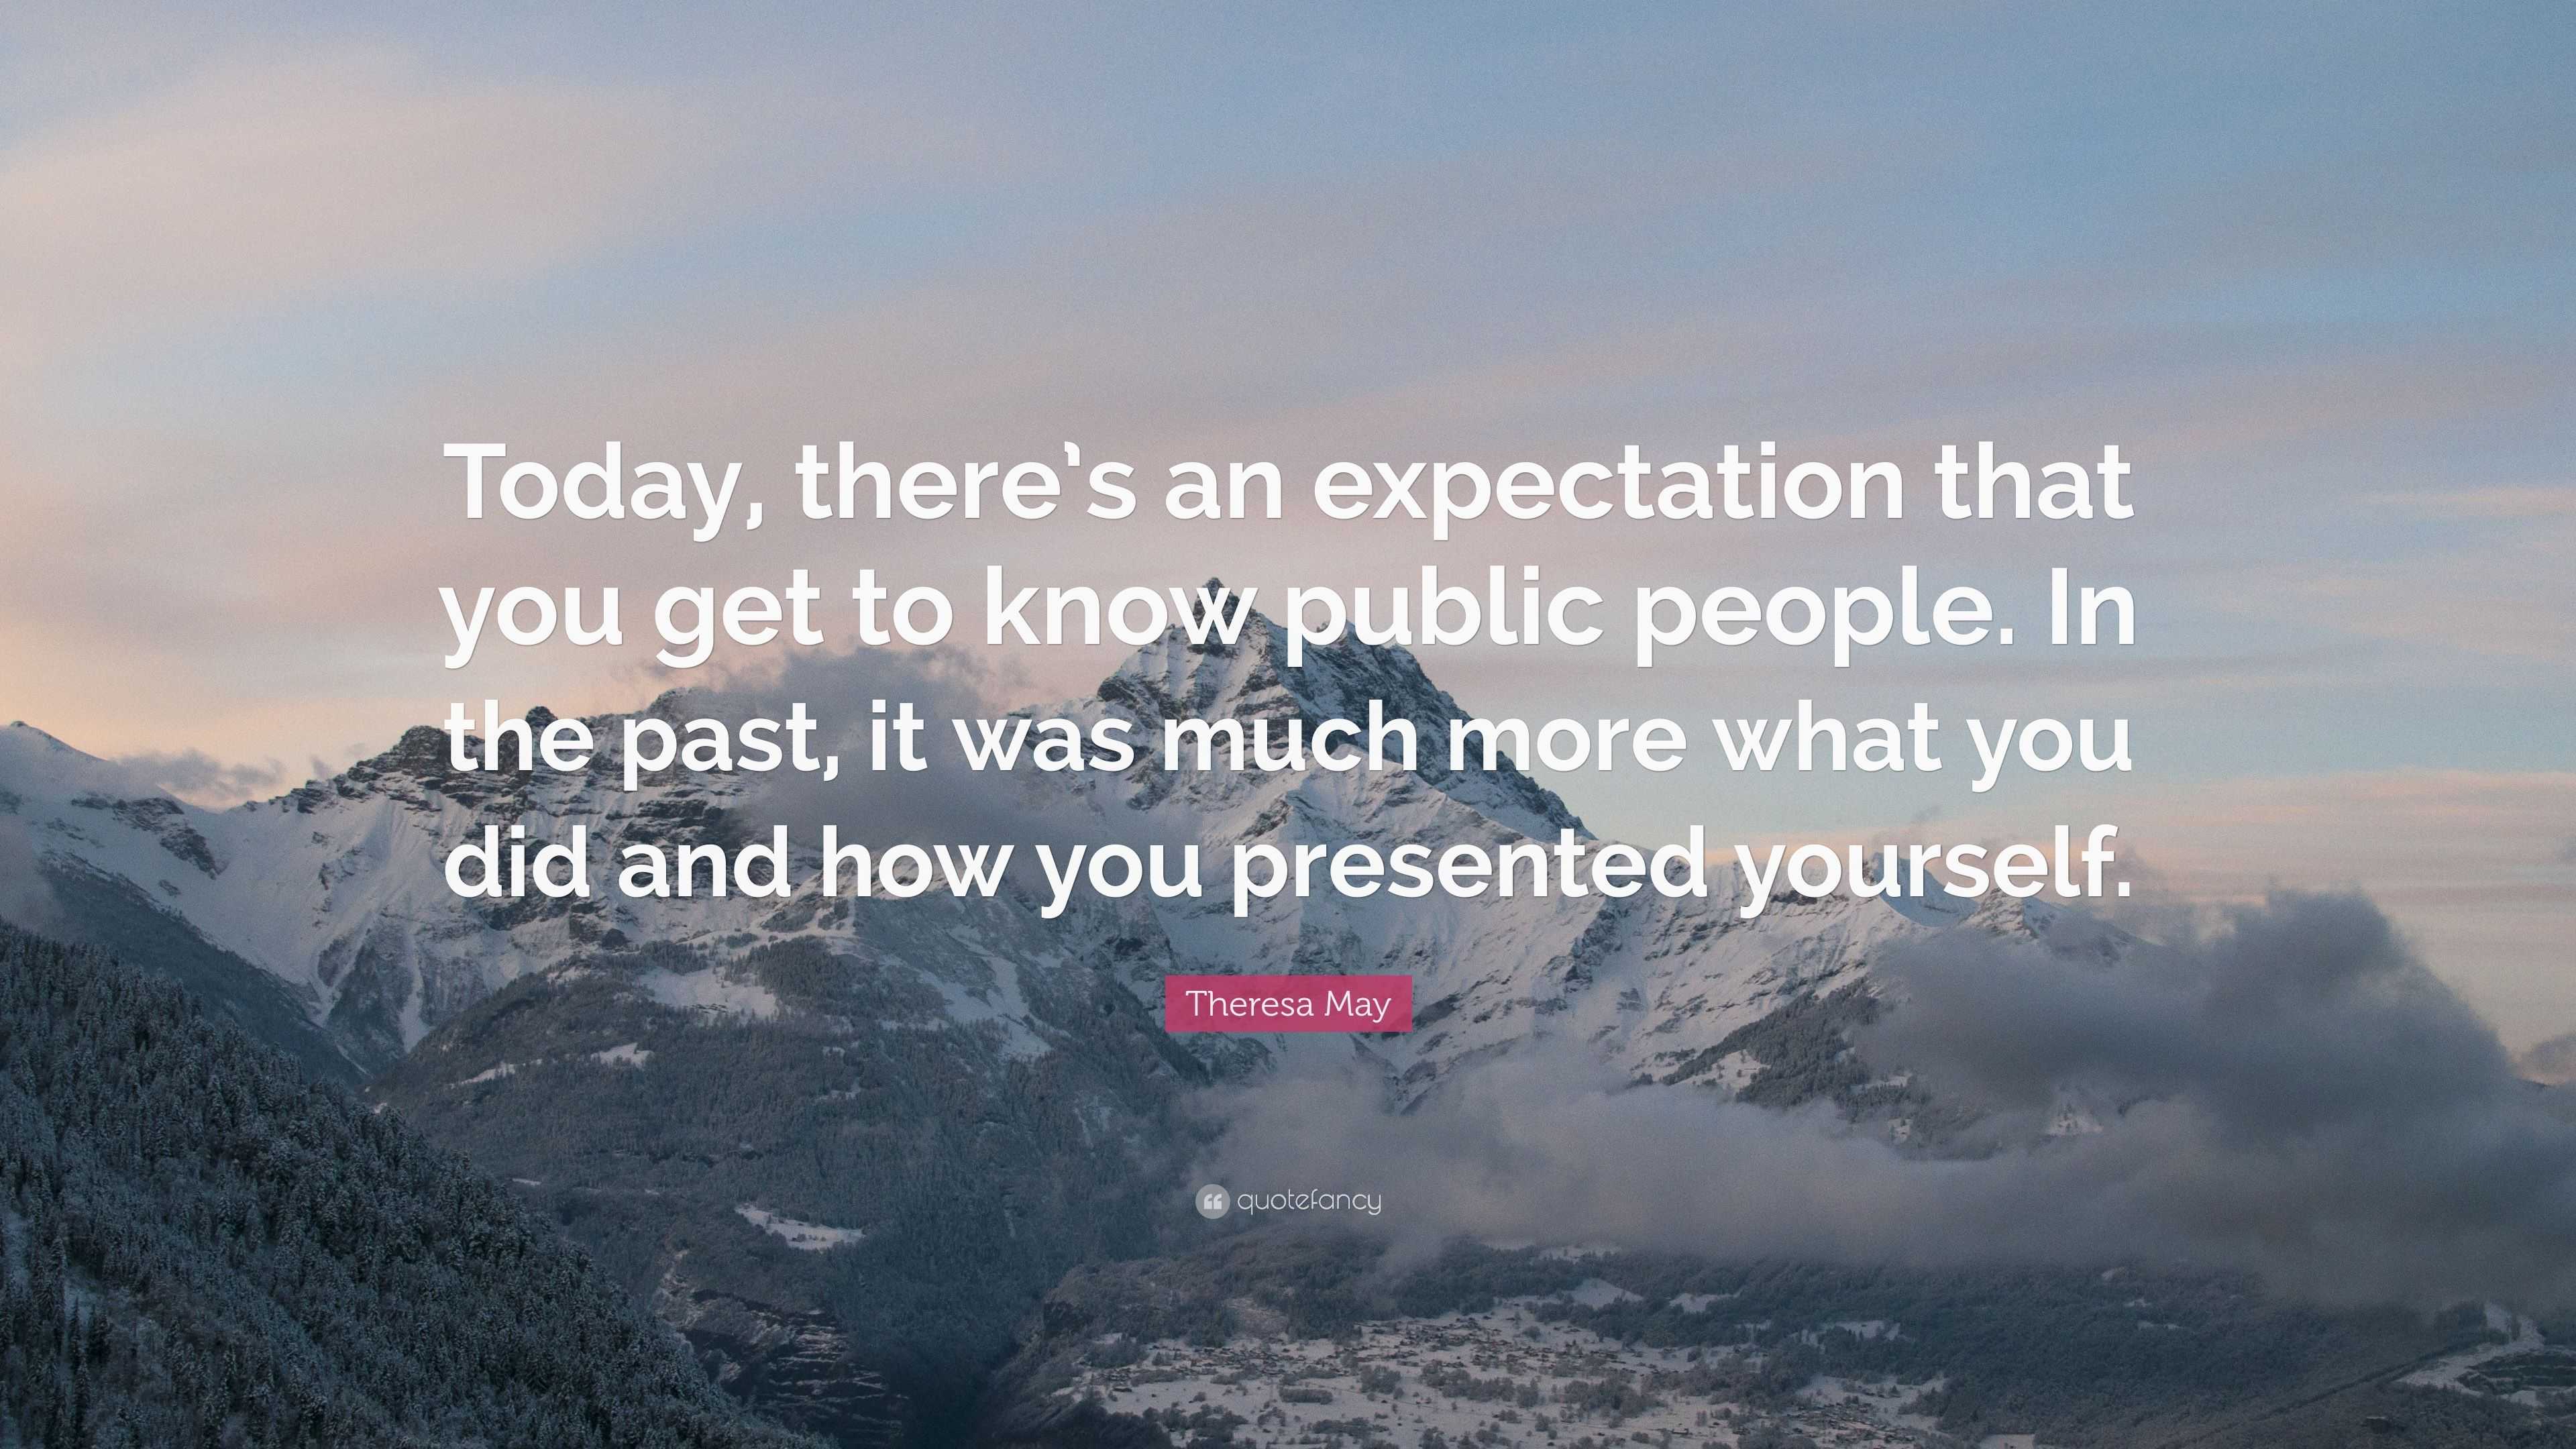 Theresa May Quote: “Today, there’s an expectation that you get to know ...